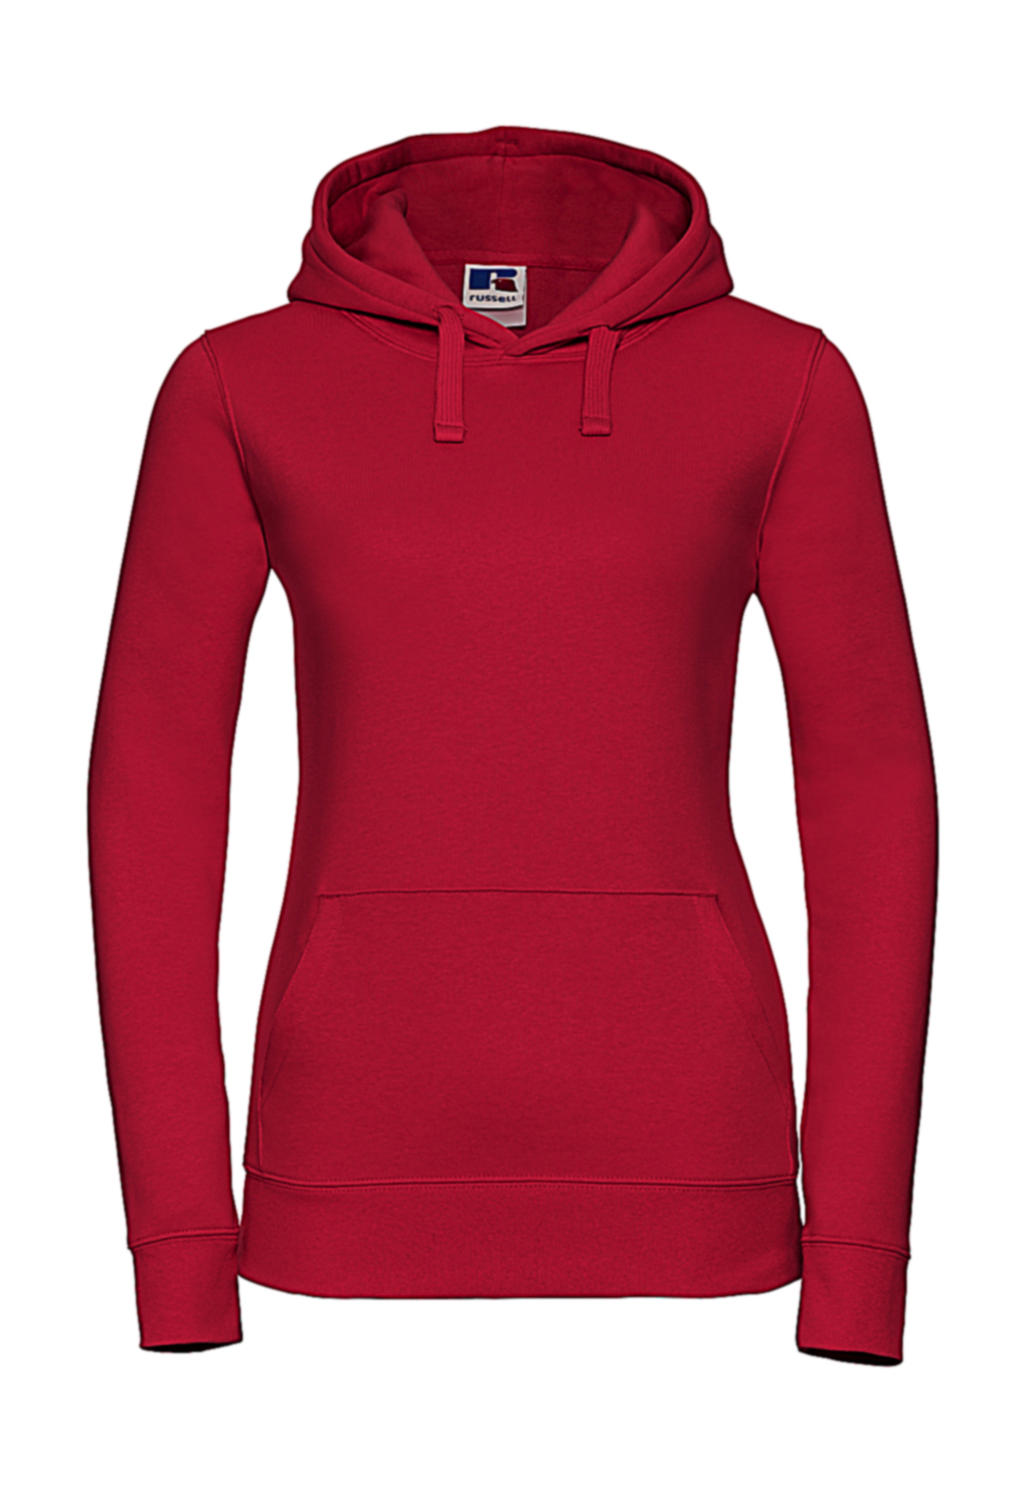  Ladies Authentic Hooded Sweat in Farbe Classic Red